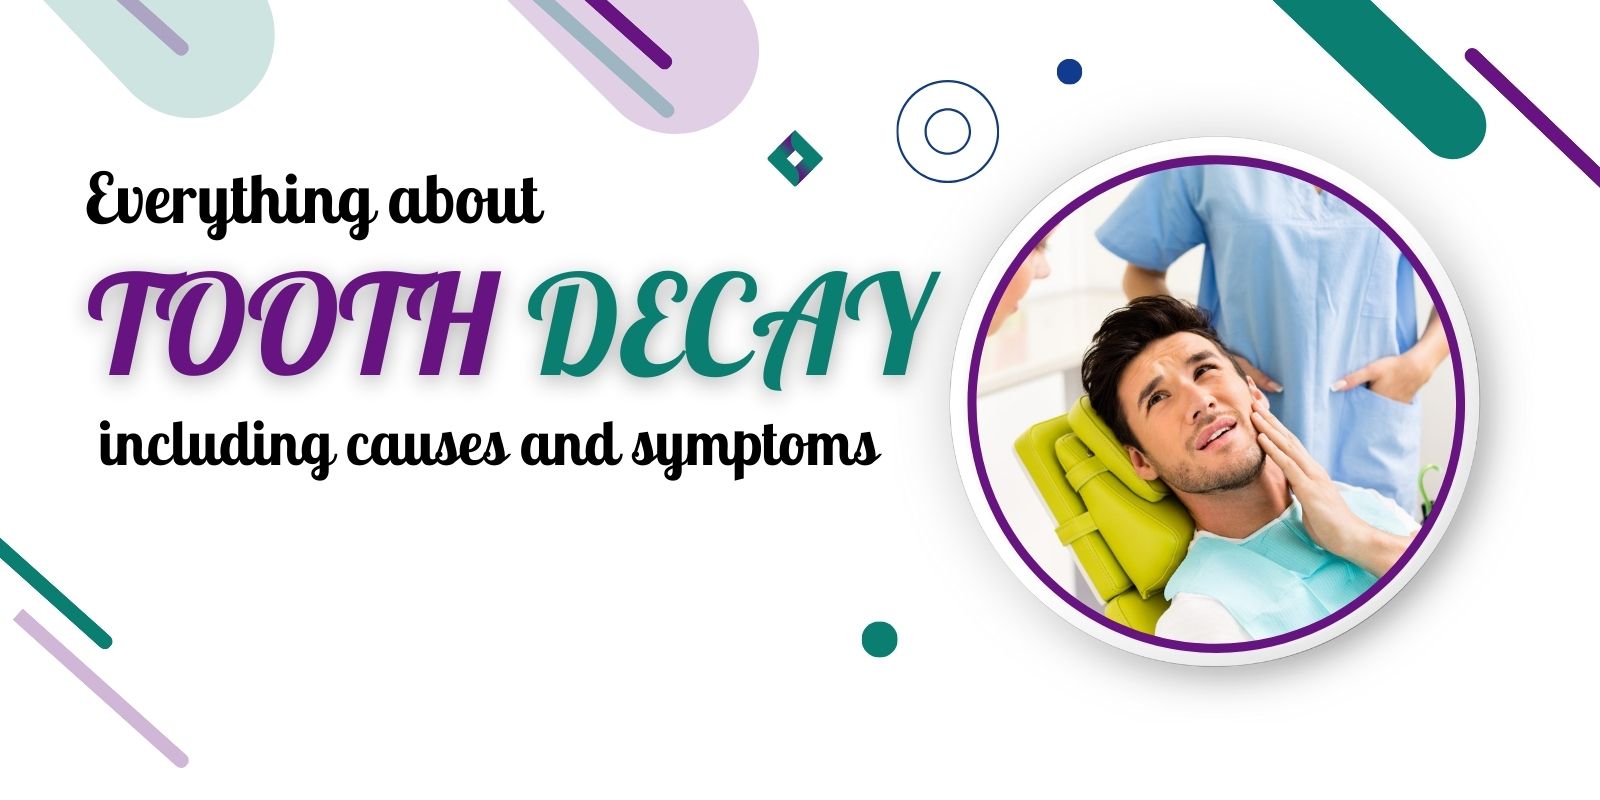 Everything about tooth decay including causes and symptoms 